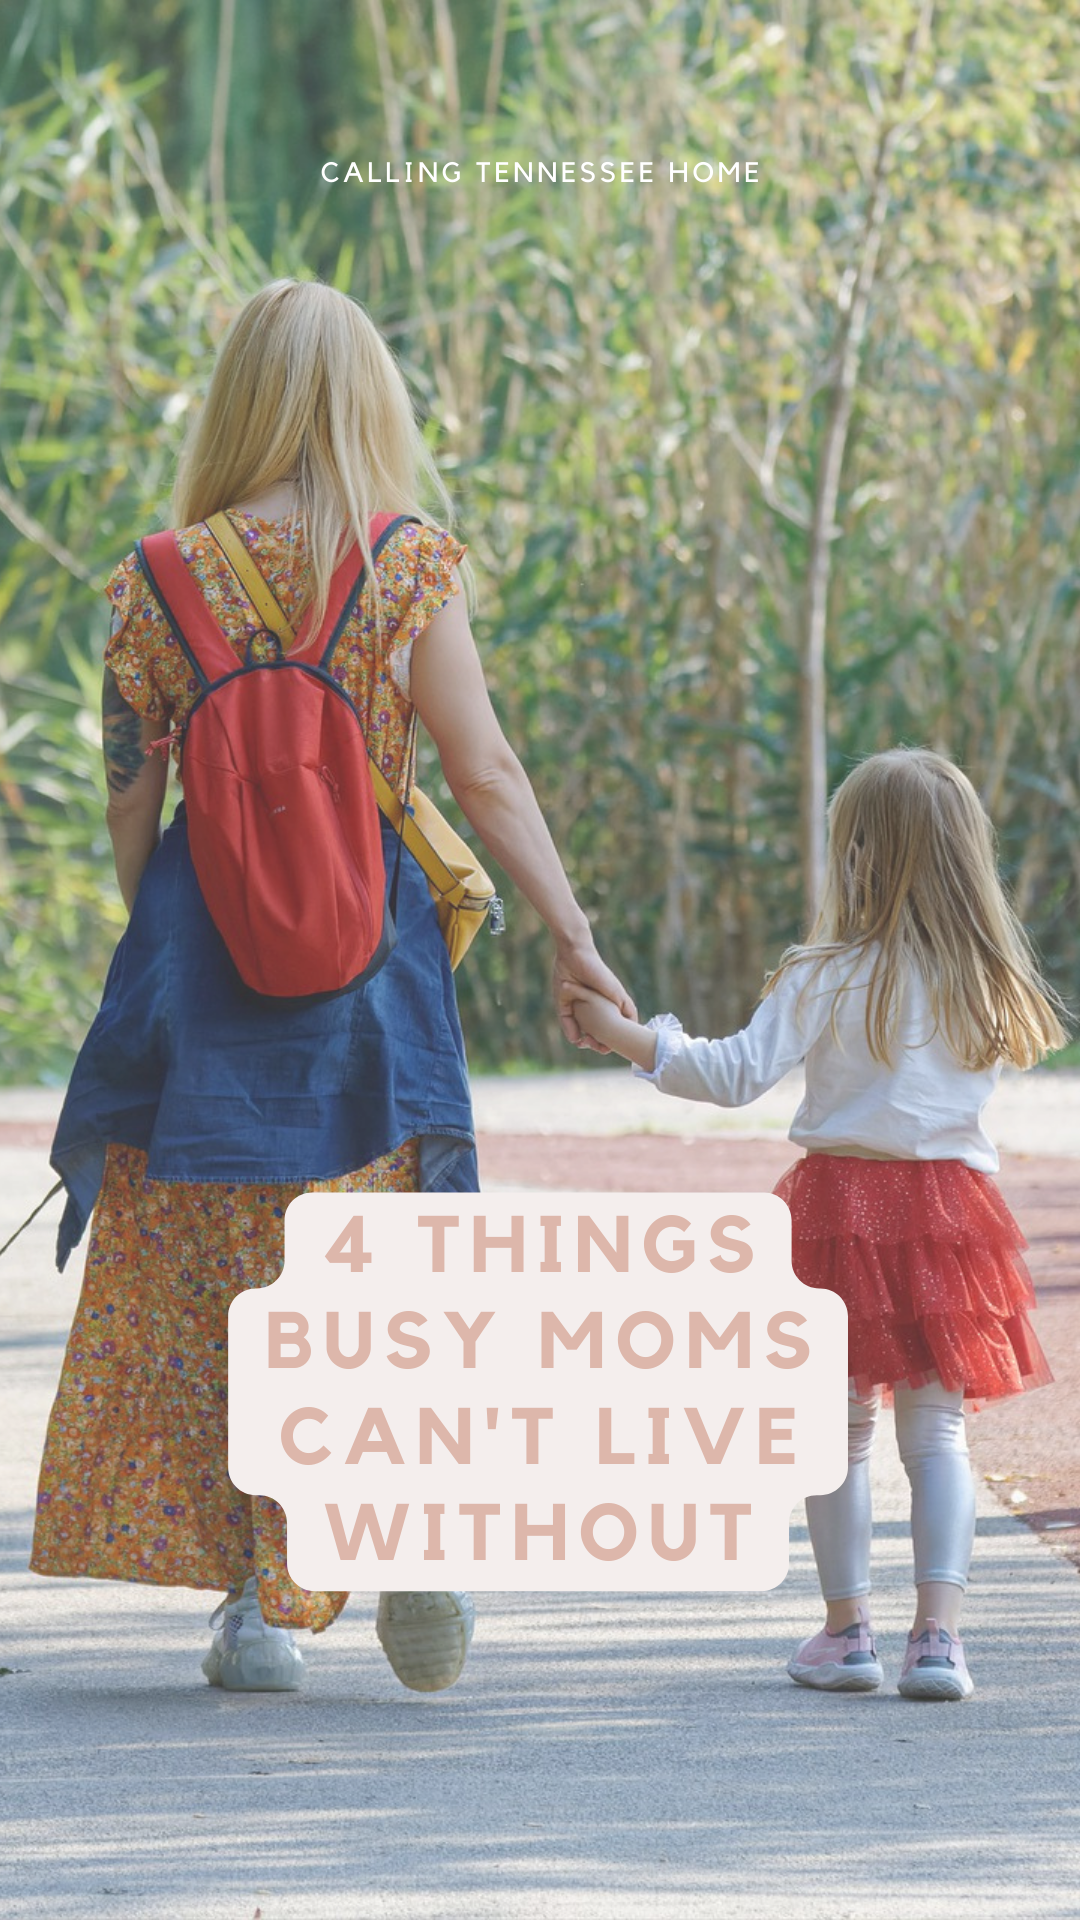 4 things busy moms cannot live without, calling tennessee home, the tennessee mom blog